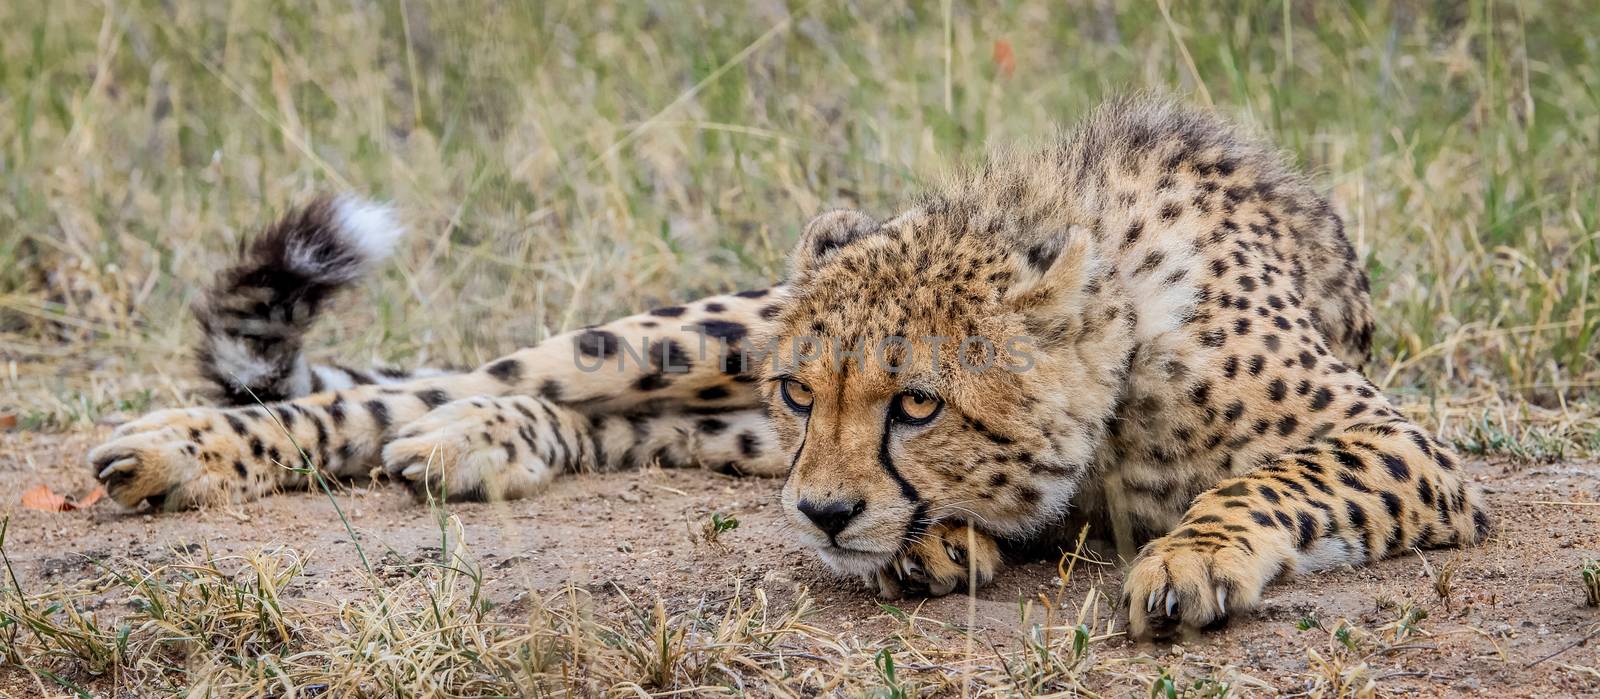 Laying Cheetah in the Selati Game Reserve by Simoneemanphotography